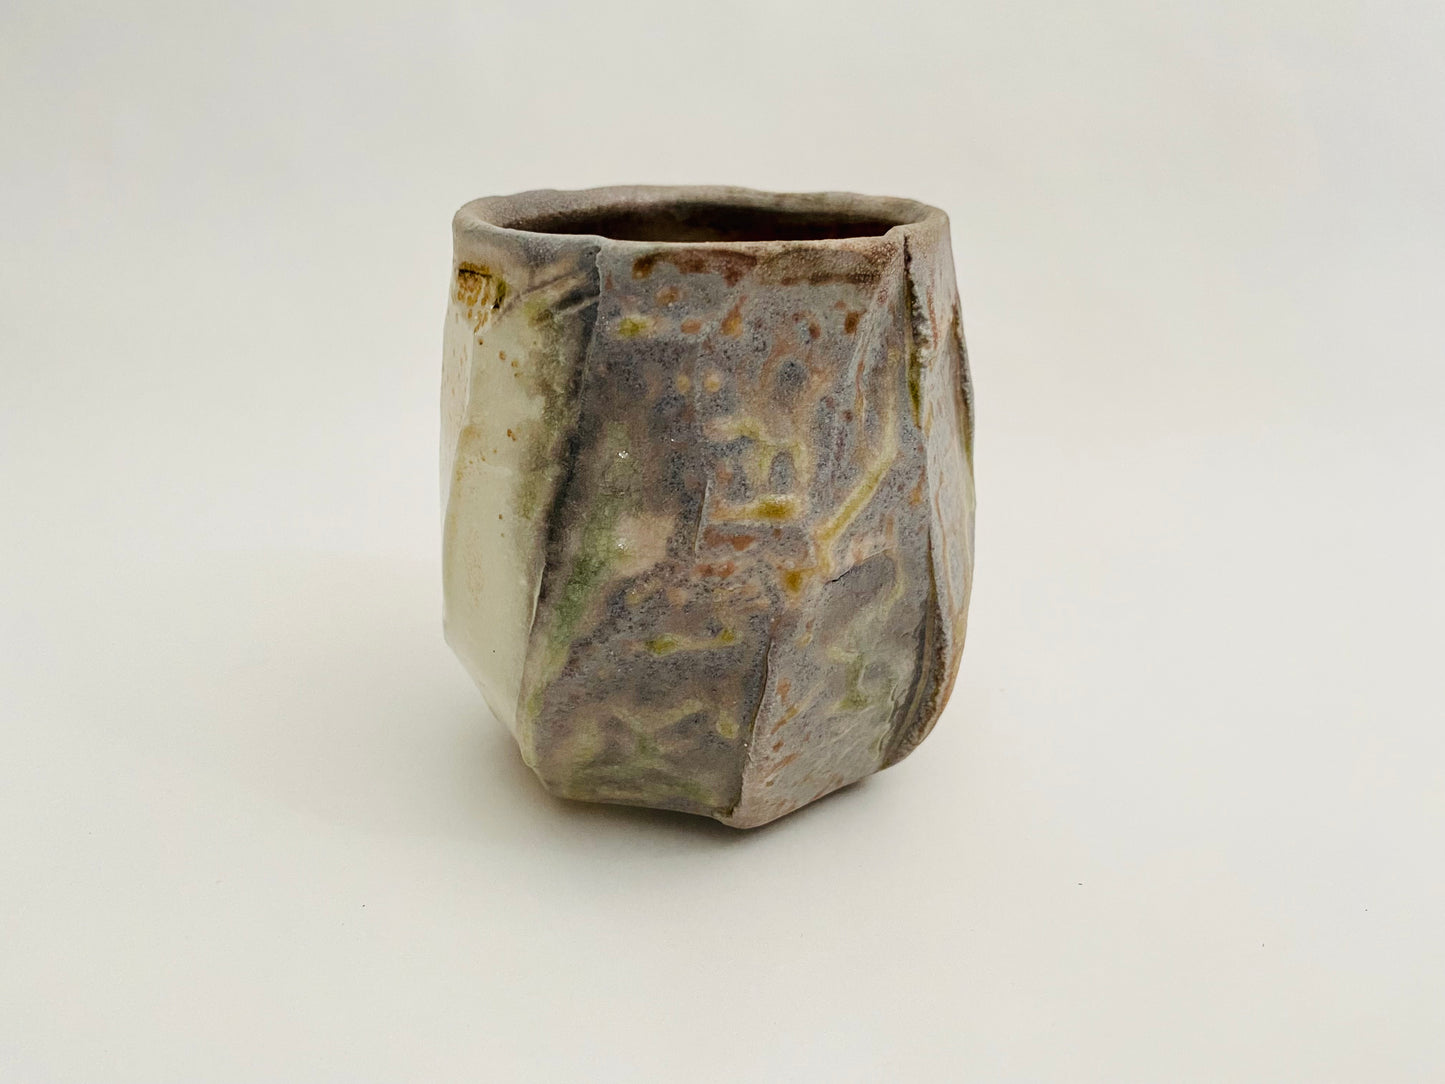 Wood fired porcelain faceted cup.